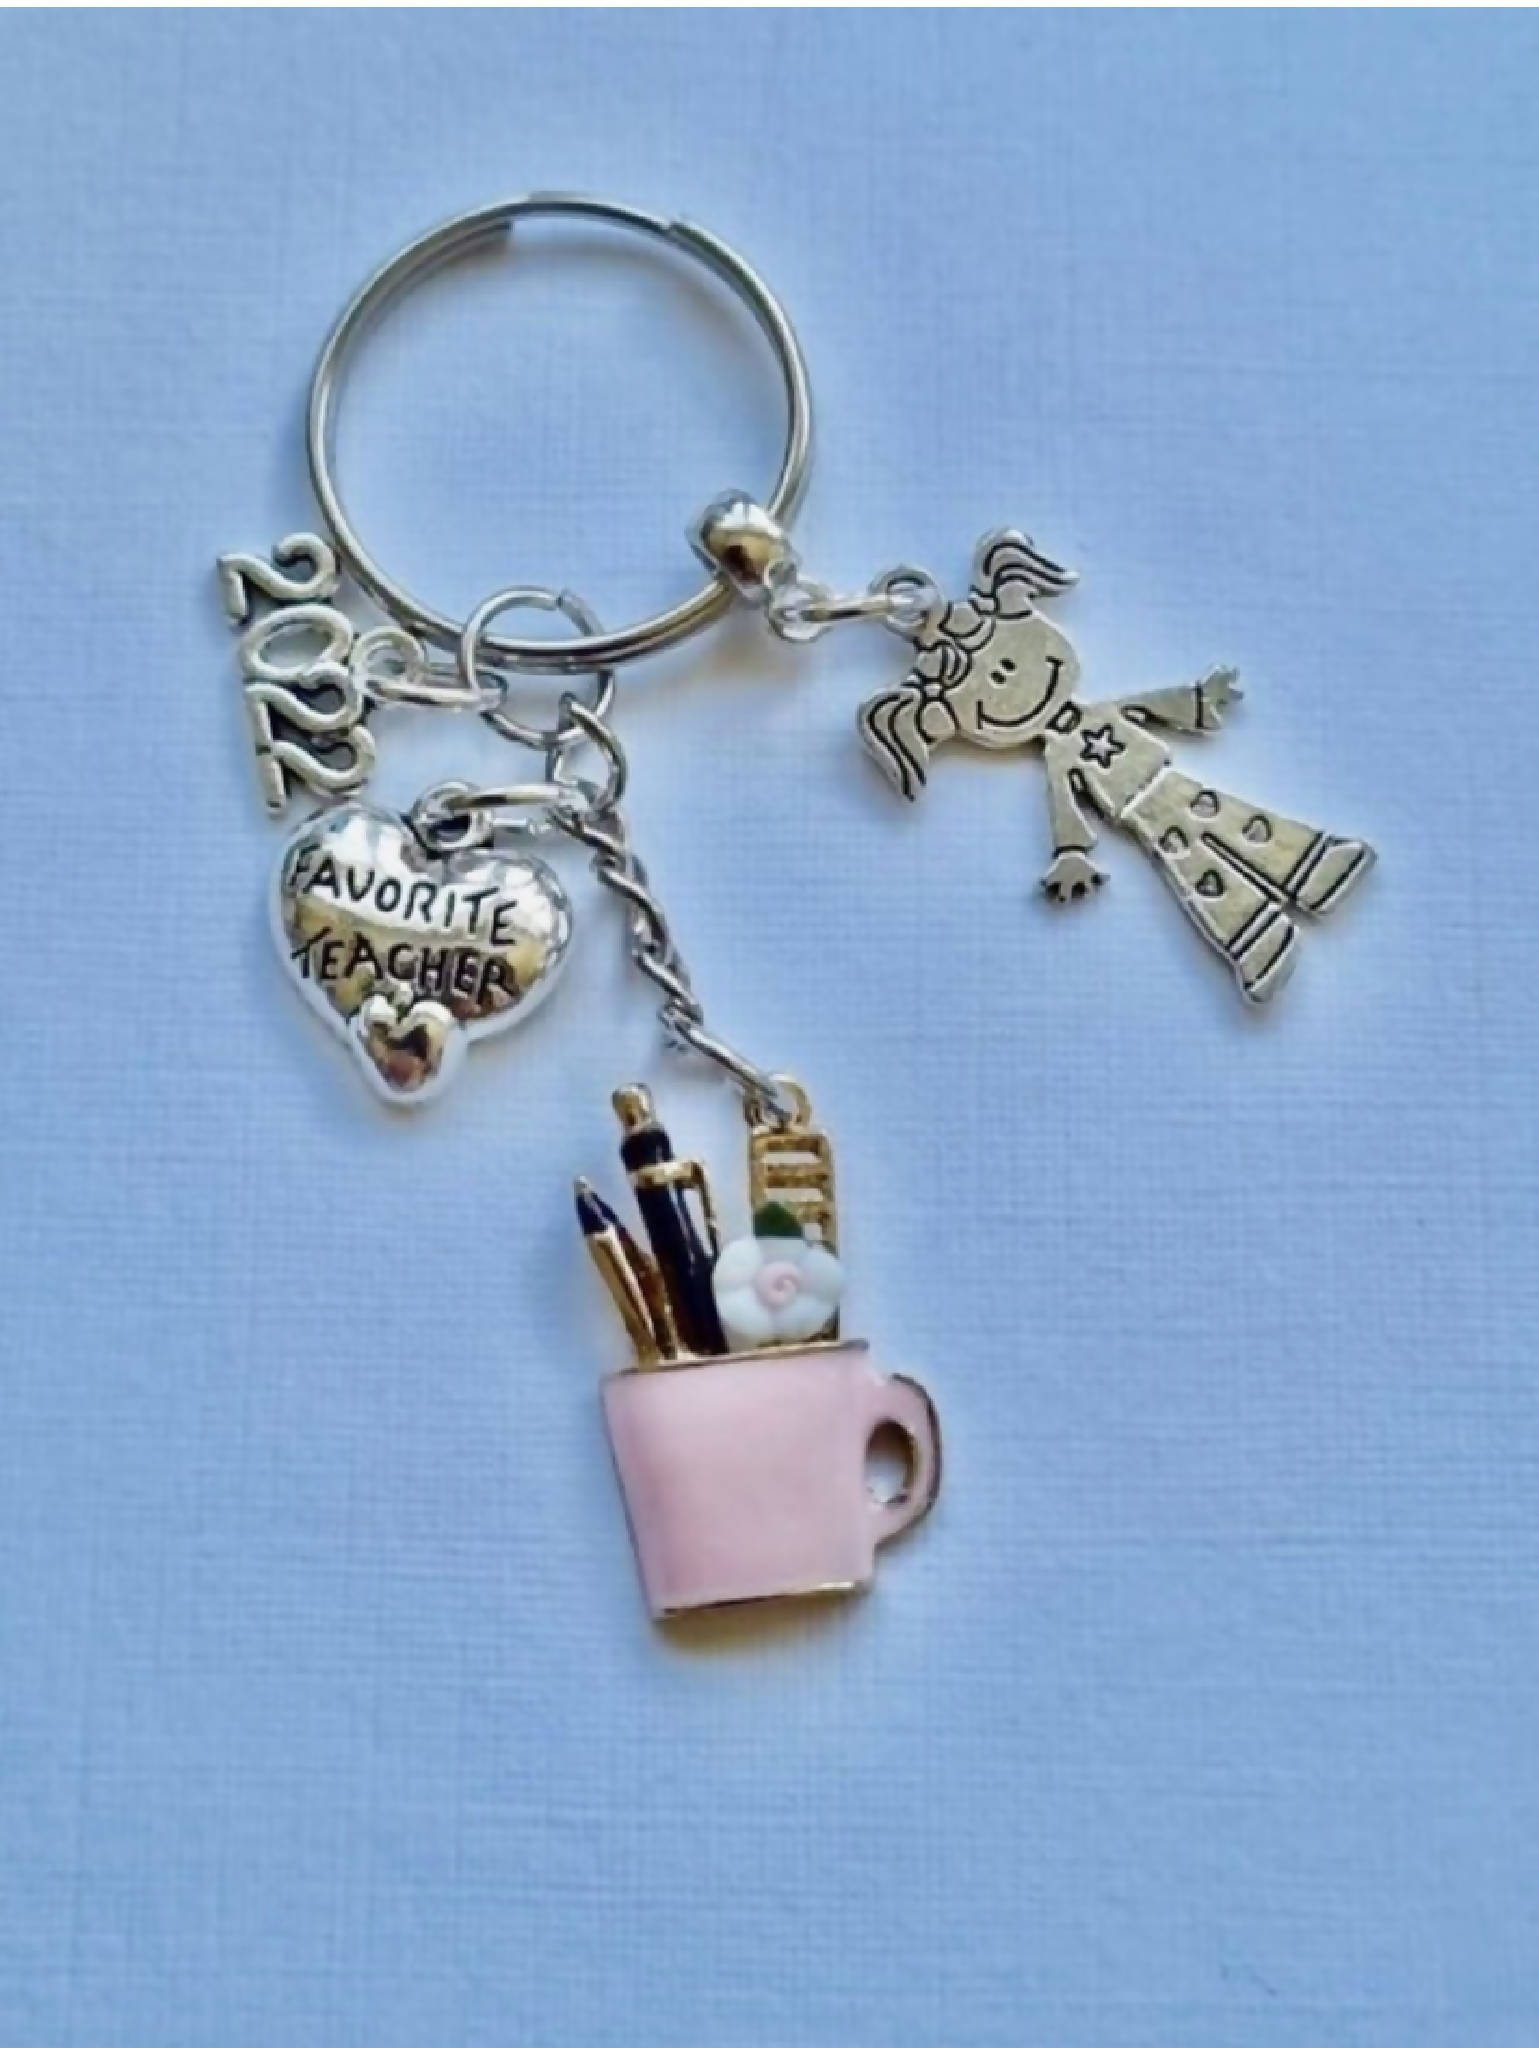 End of term gift for your child's teacher. Pretty keyring with charms.